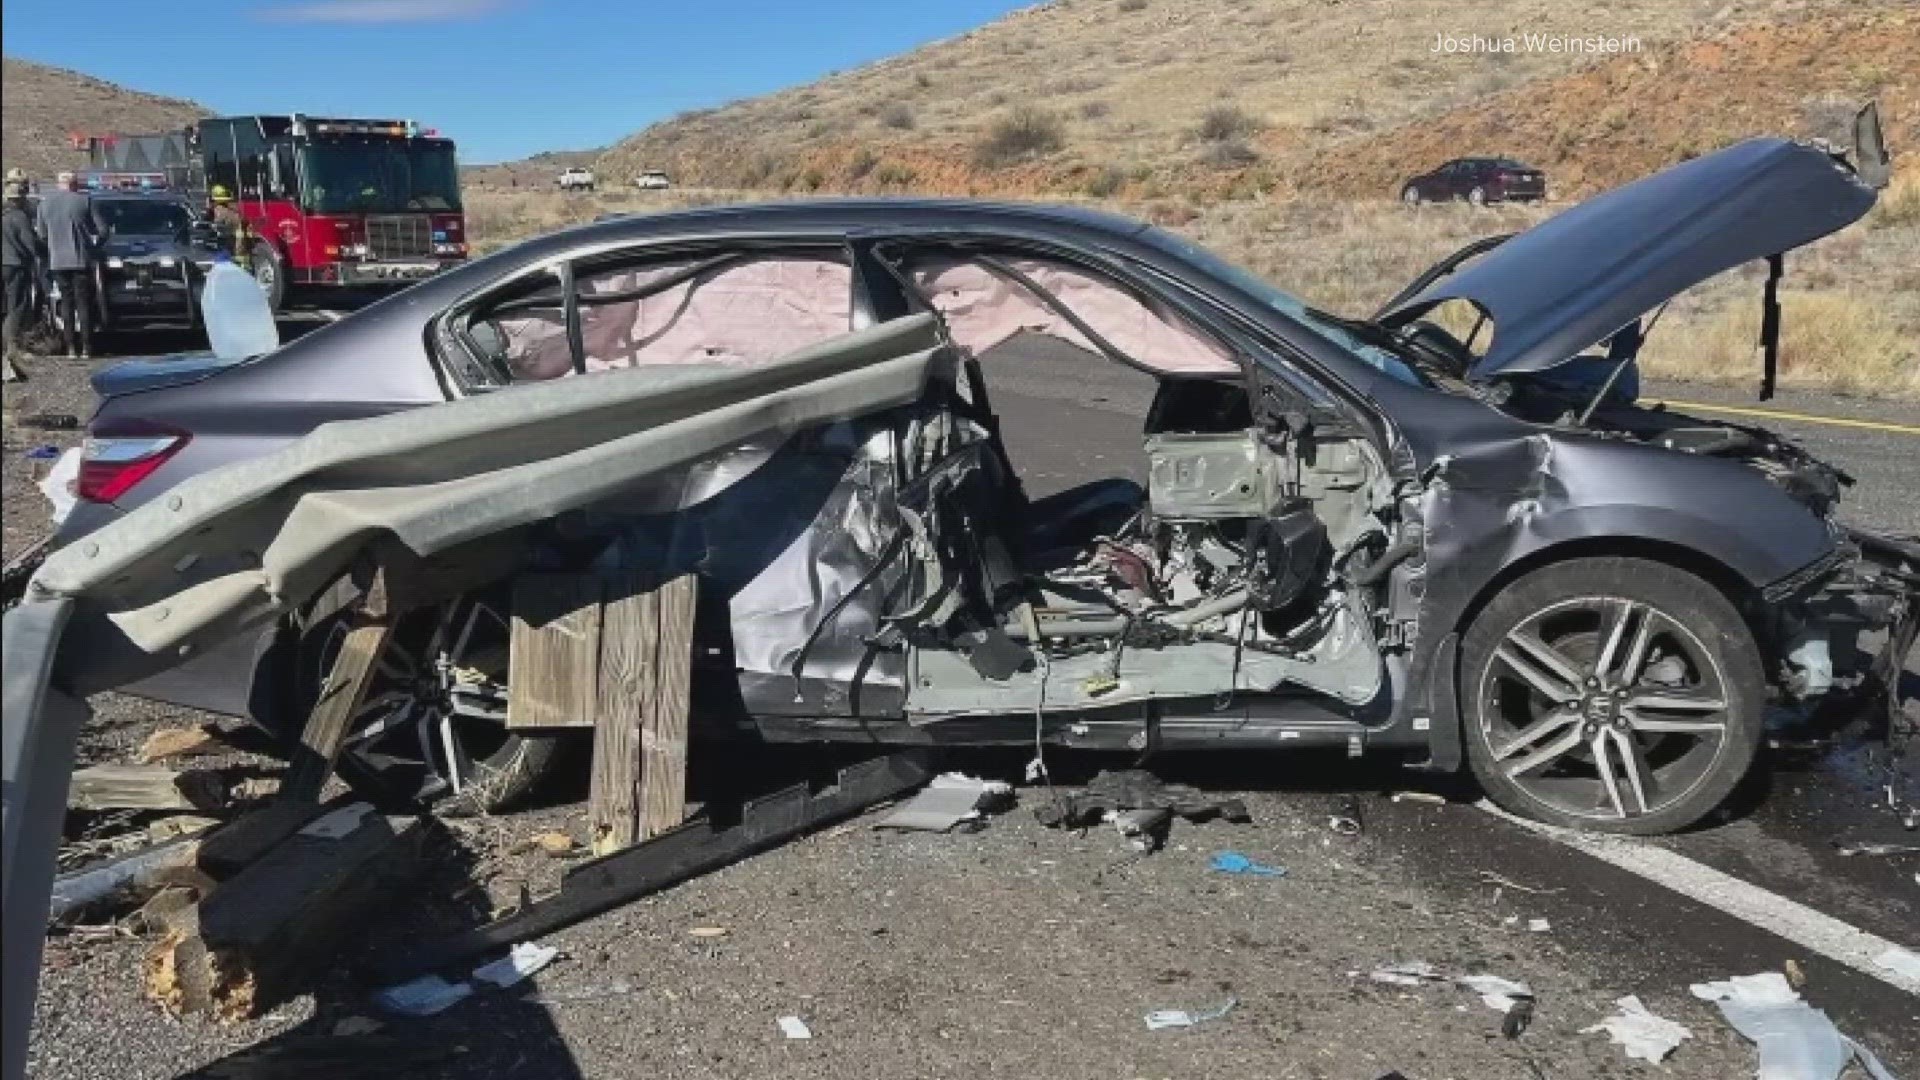 Jett Weinstein and his friend, Jaxson Elliot, crashed into a guardrail with a controversial history back on Feb. 4 when they were driving back from Flagstaff.